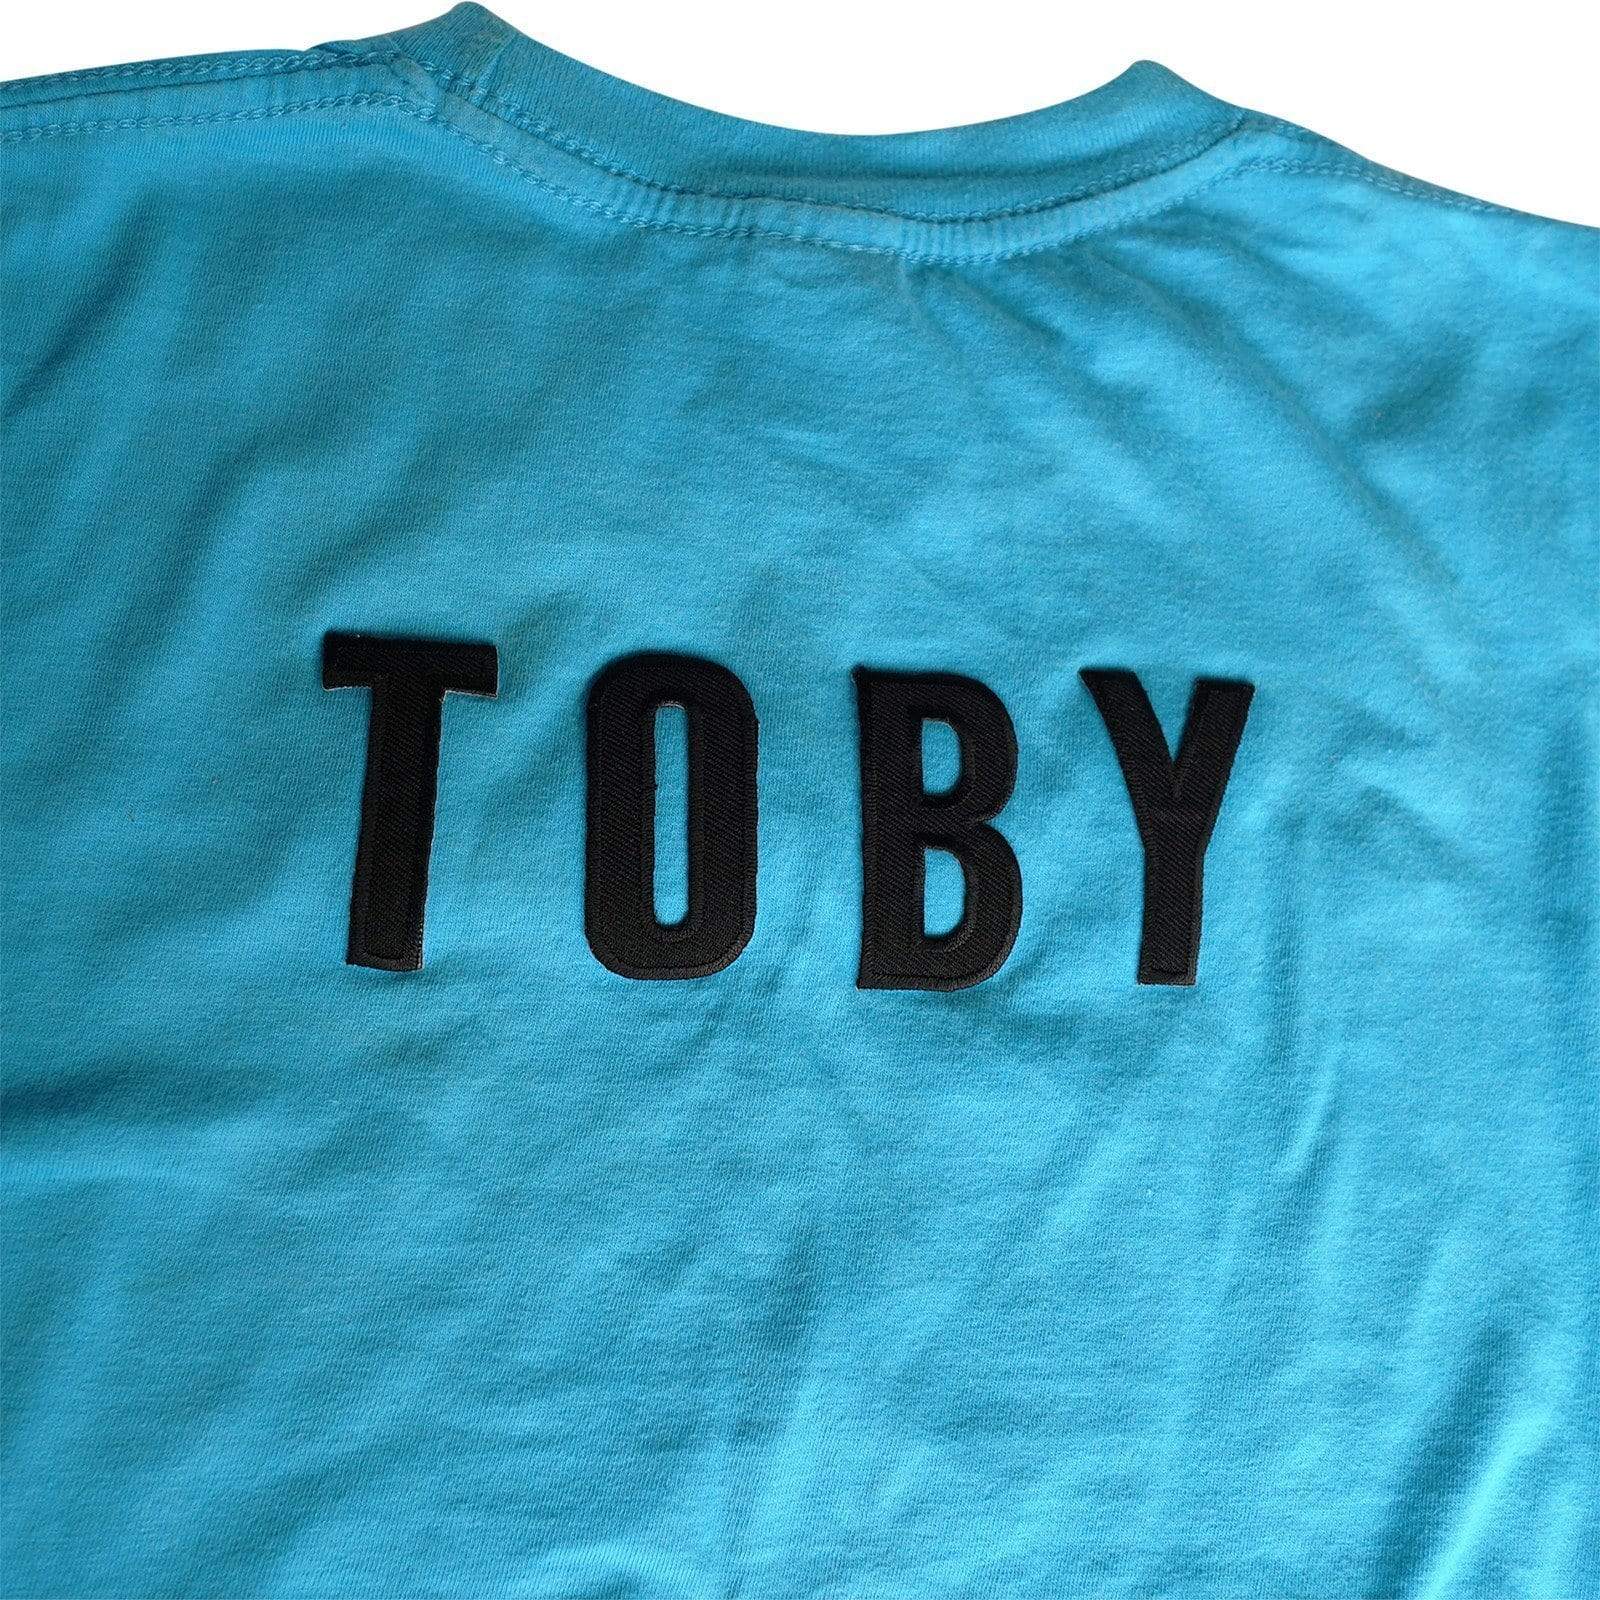 TOBY Name Patch Embroidered Letters Tag Label Badge Iron Sew On Clothes T Shirt